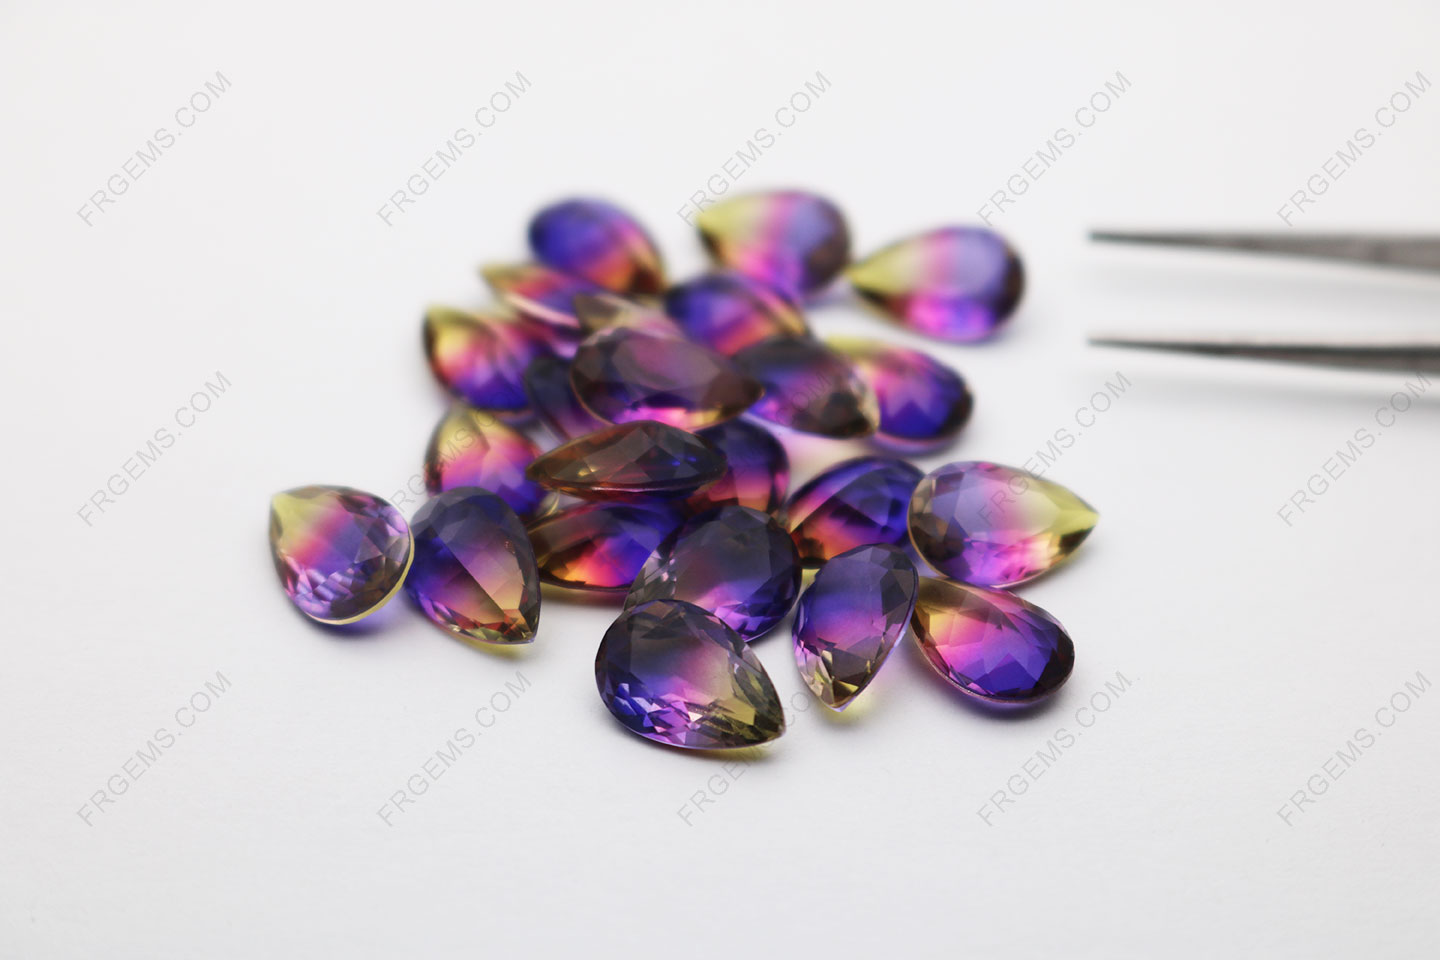 Loose Synthetic Watermelon Tourmaline Glass BiColor BX11 Pear Shape Faceted 12x8mm gemstones